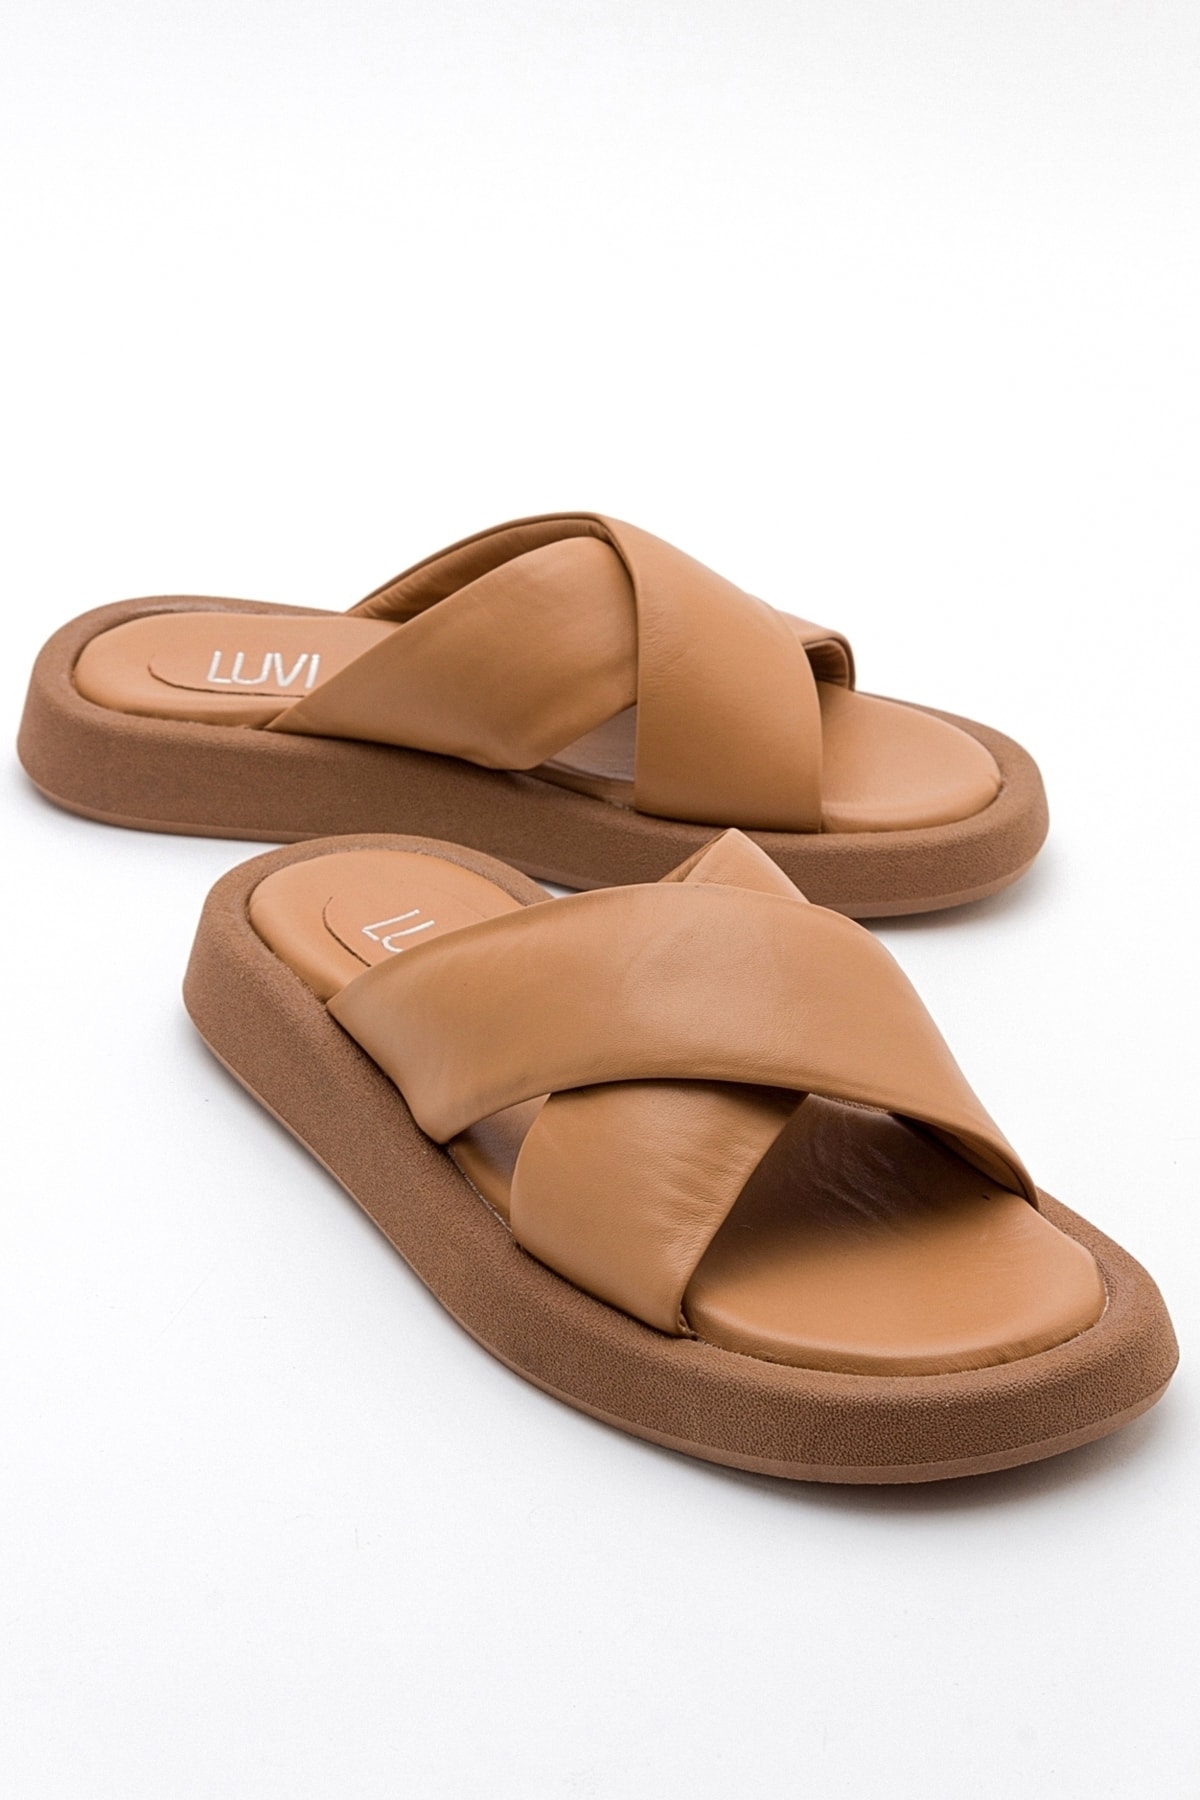 Levně LuviShoes VOLAJO Women's Slippers With Glazed Genuine Leather Cross-Band